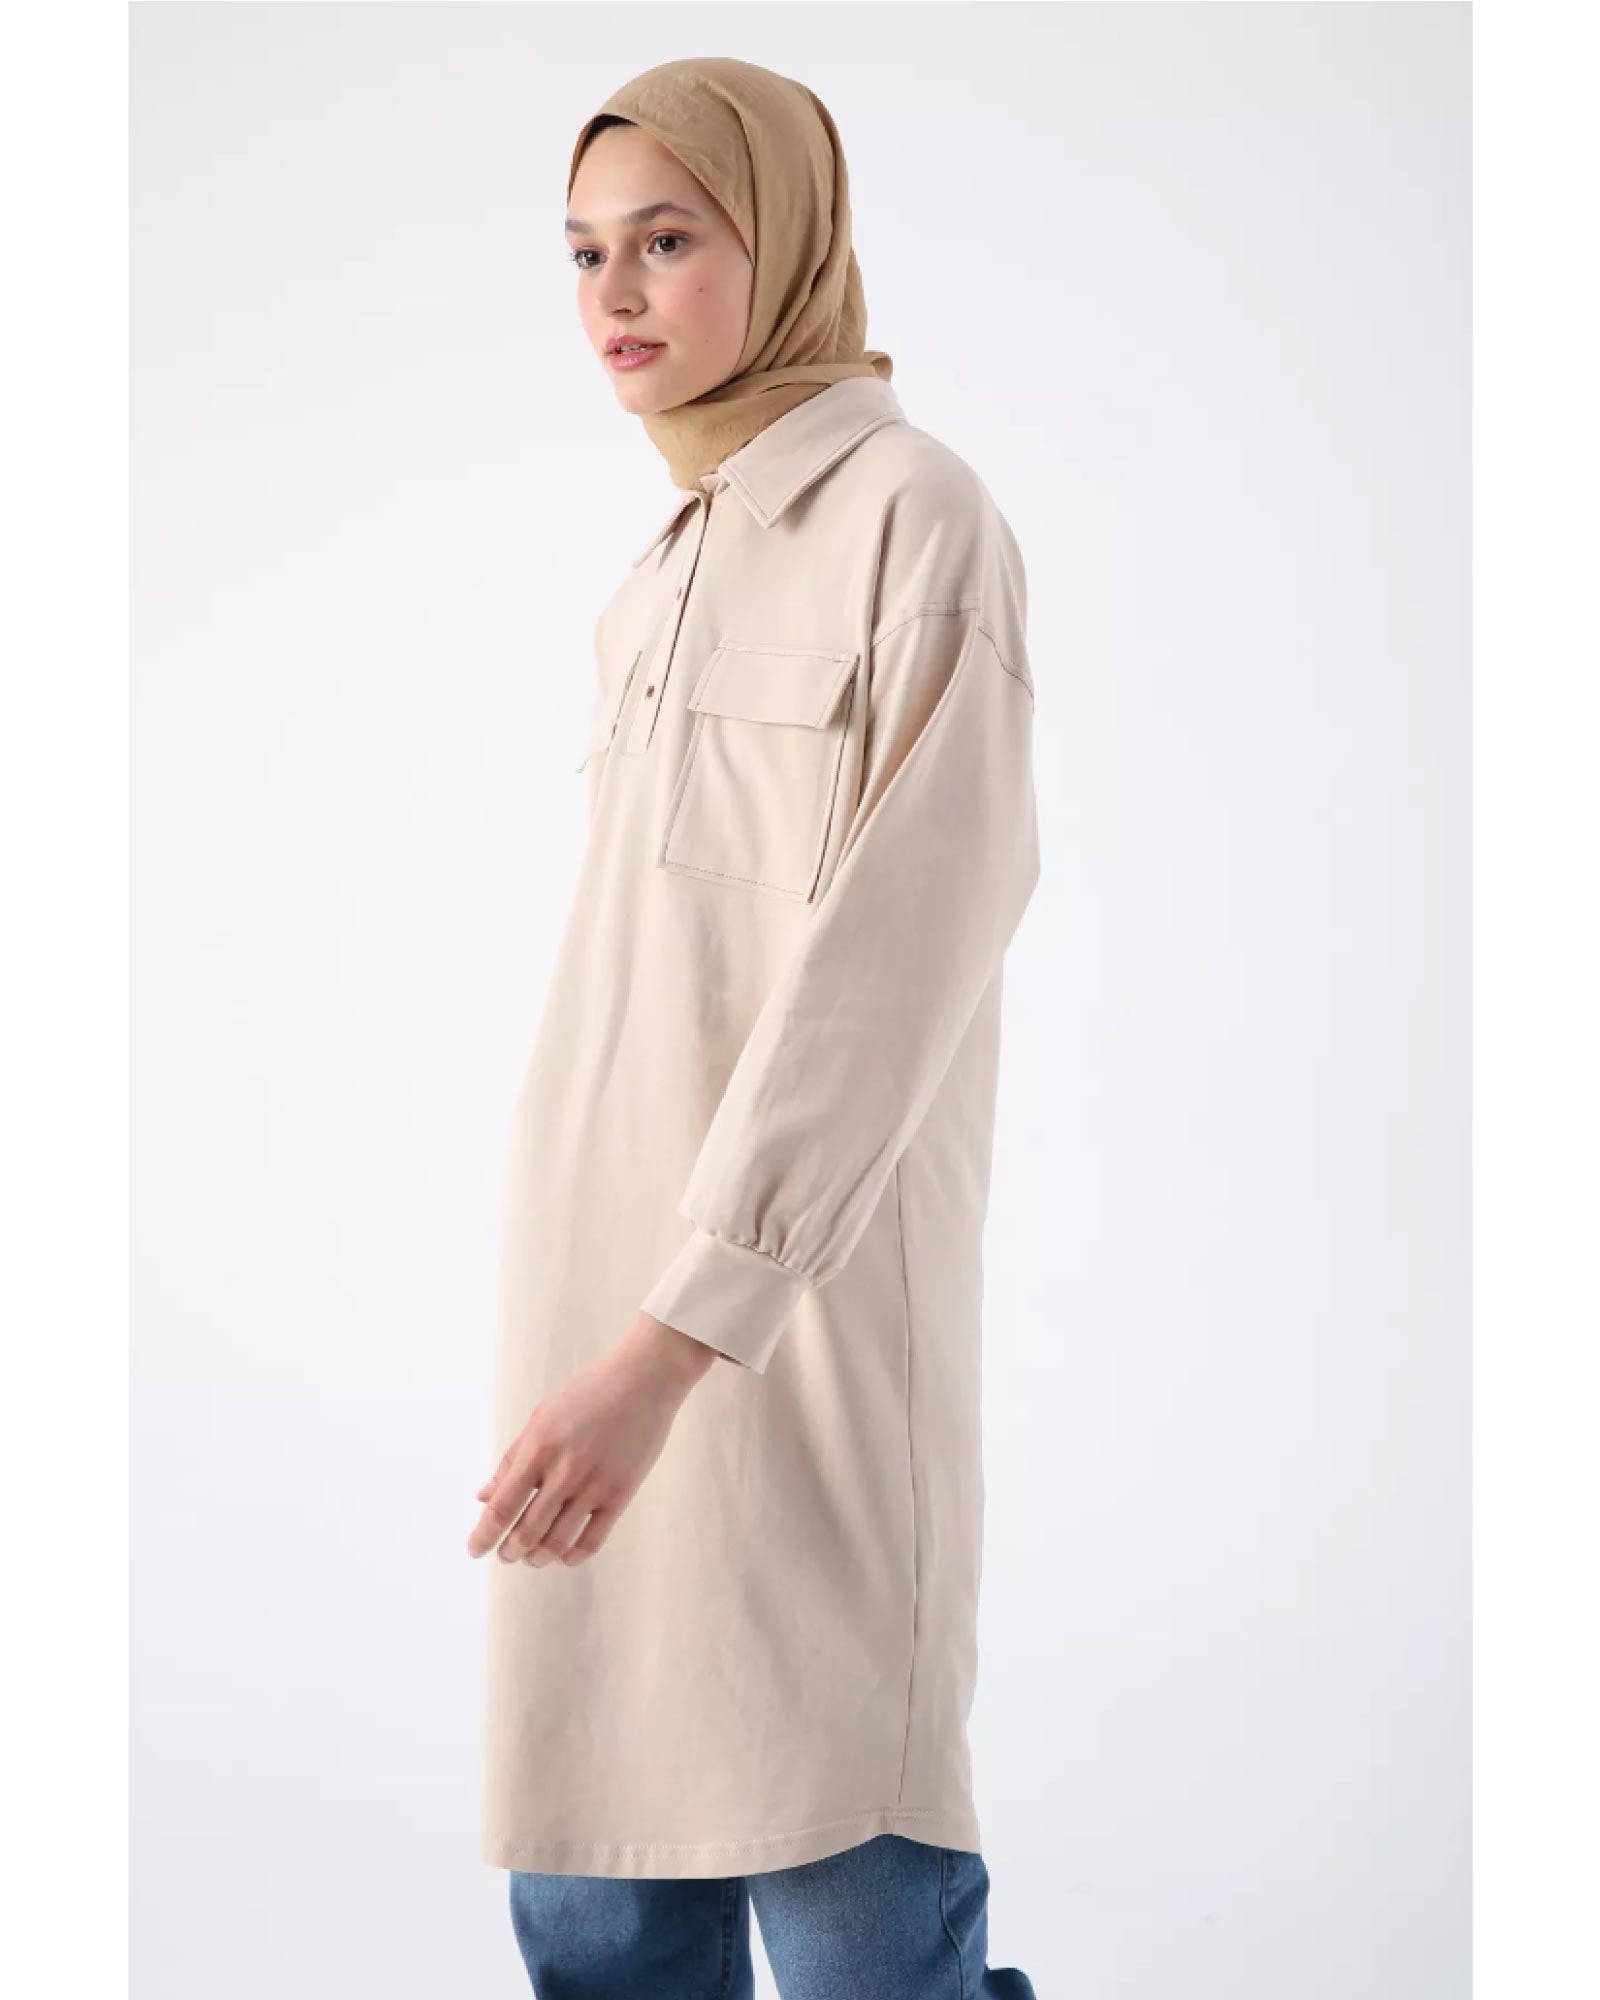 Hijab- Half-buttoned hooded tunic with embroidery and pockets